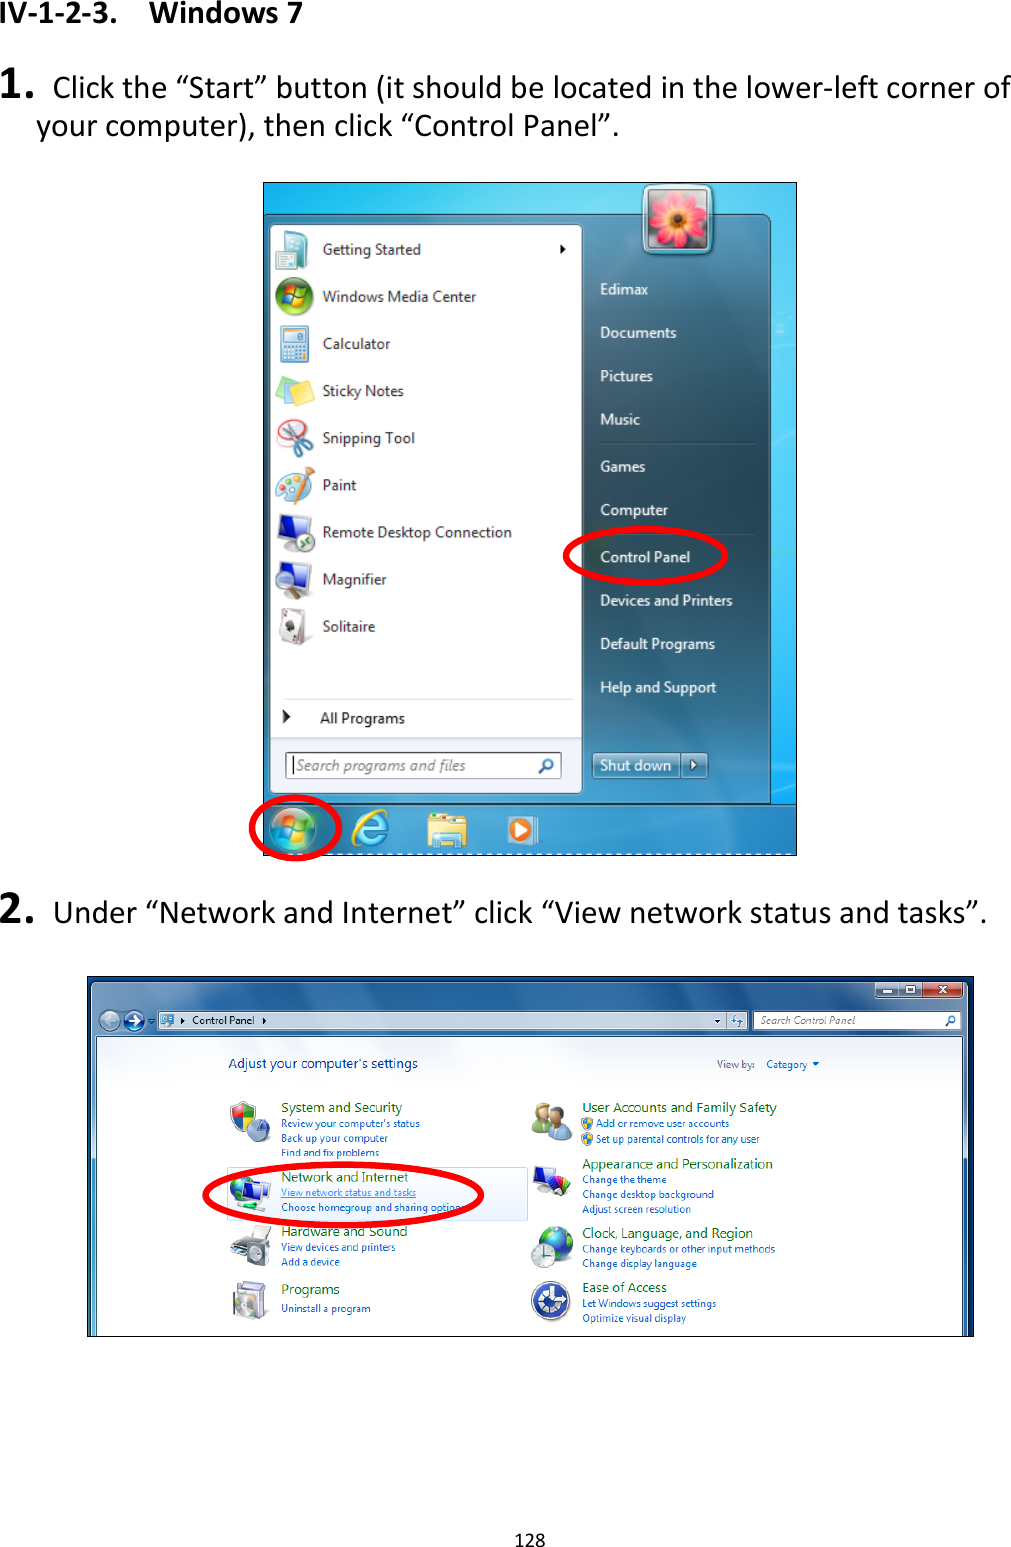 128  IV-1-2-3.  Windows 7  1.   Click the “Start” button (it should be located in the lower-left corner of your computer), then click “Control Panel”.    2.   Under “Network and Internet” click “View network status and tasks”.       